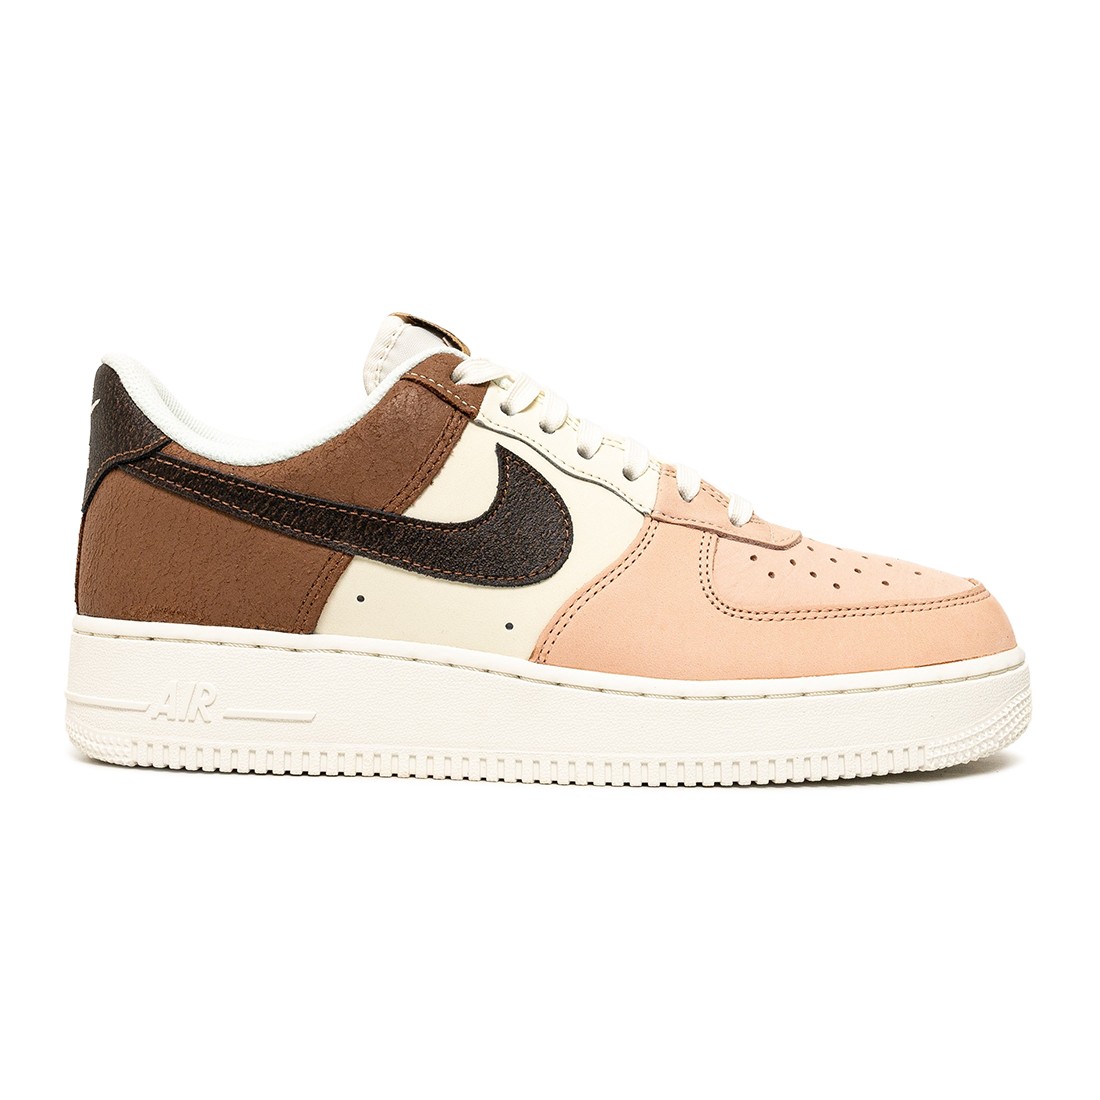 The Nike Air Force Low Appears In White, Black, Tan And, 54% OFF